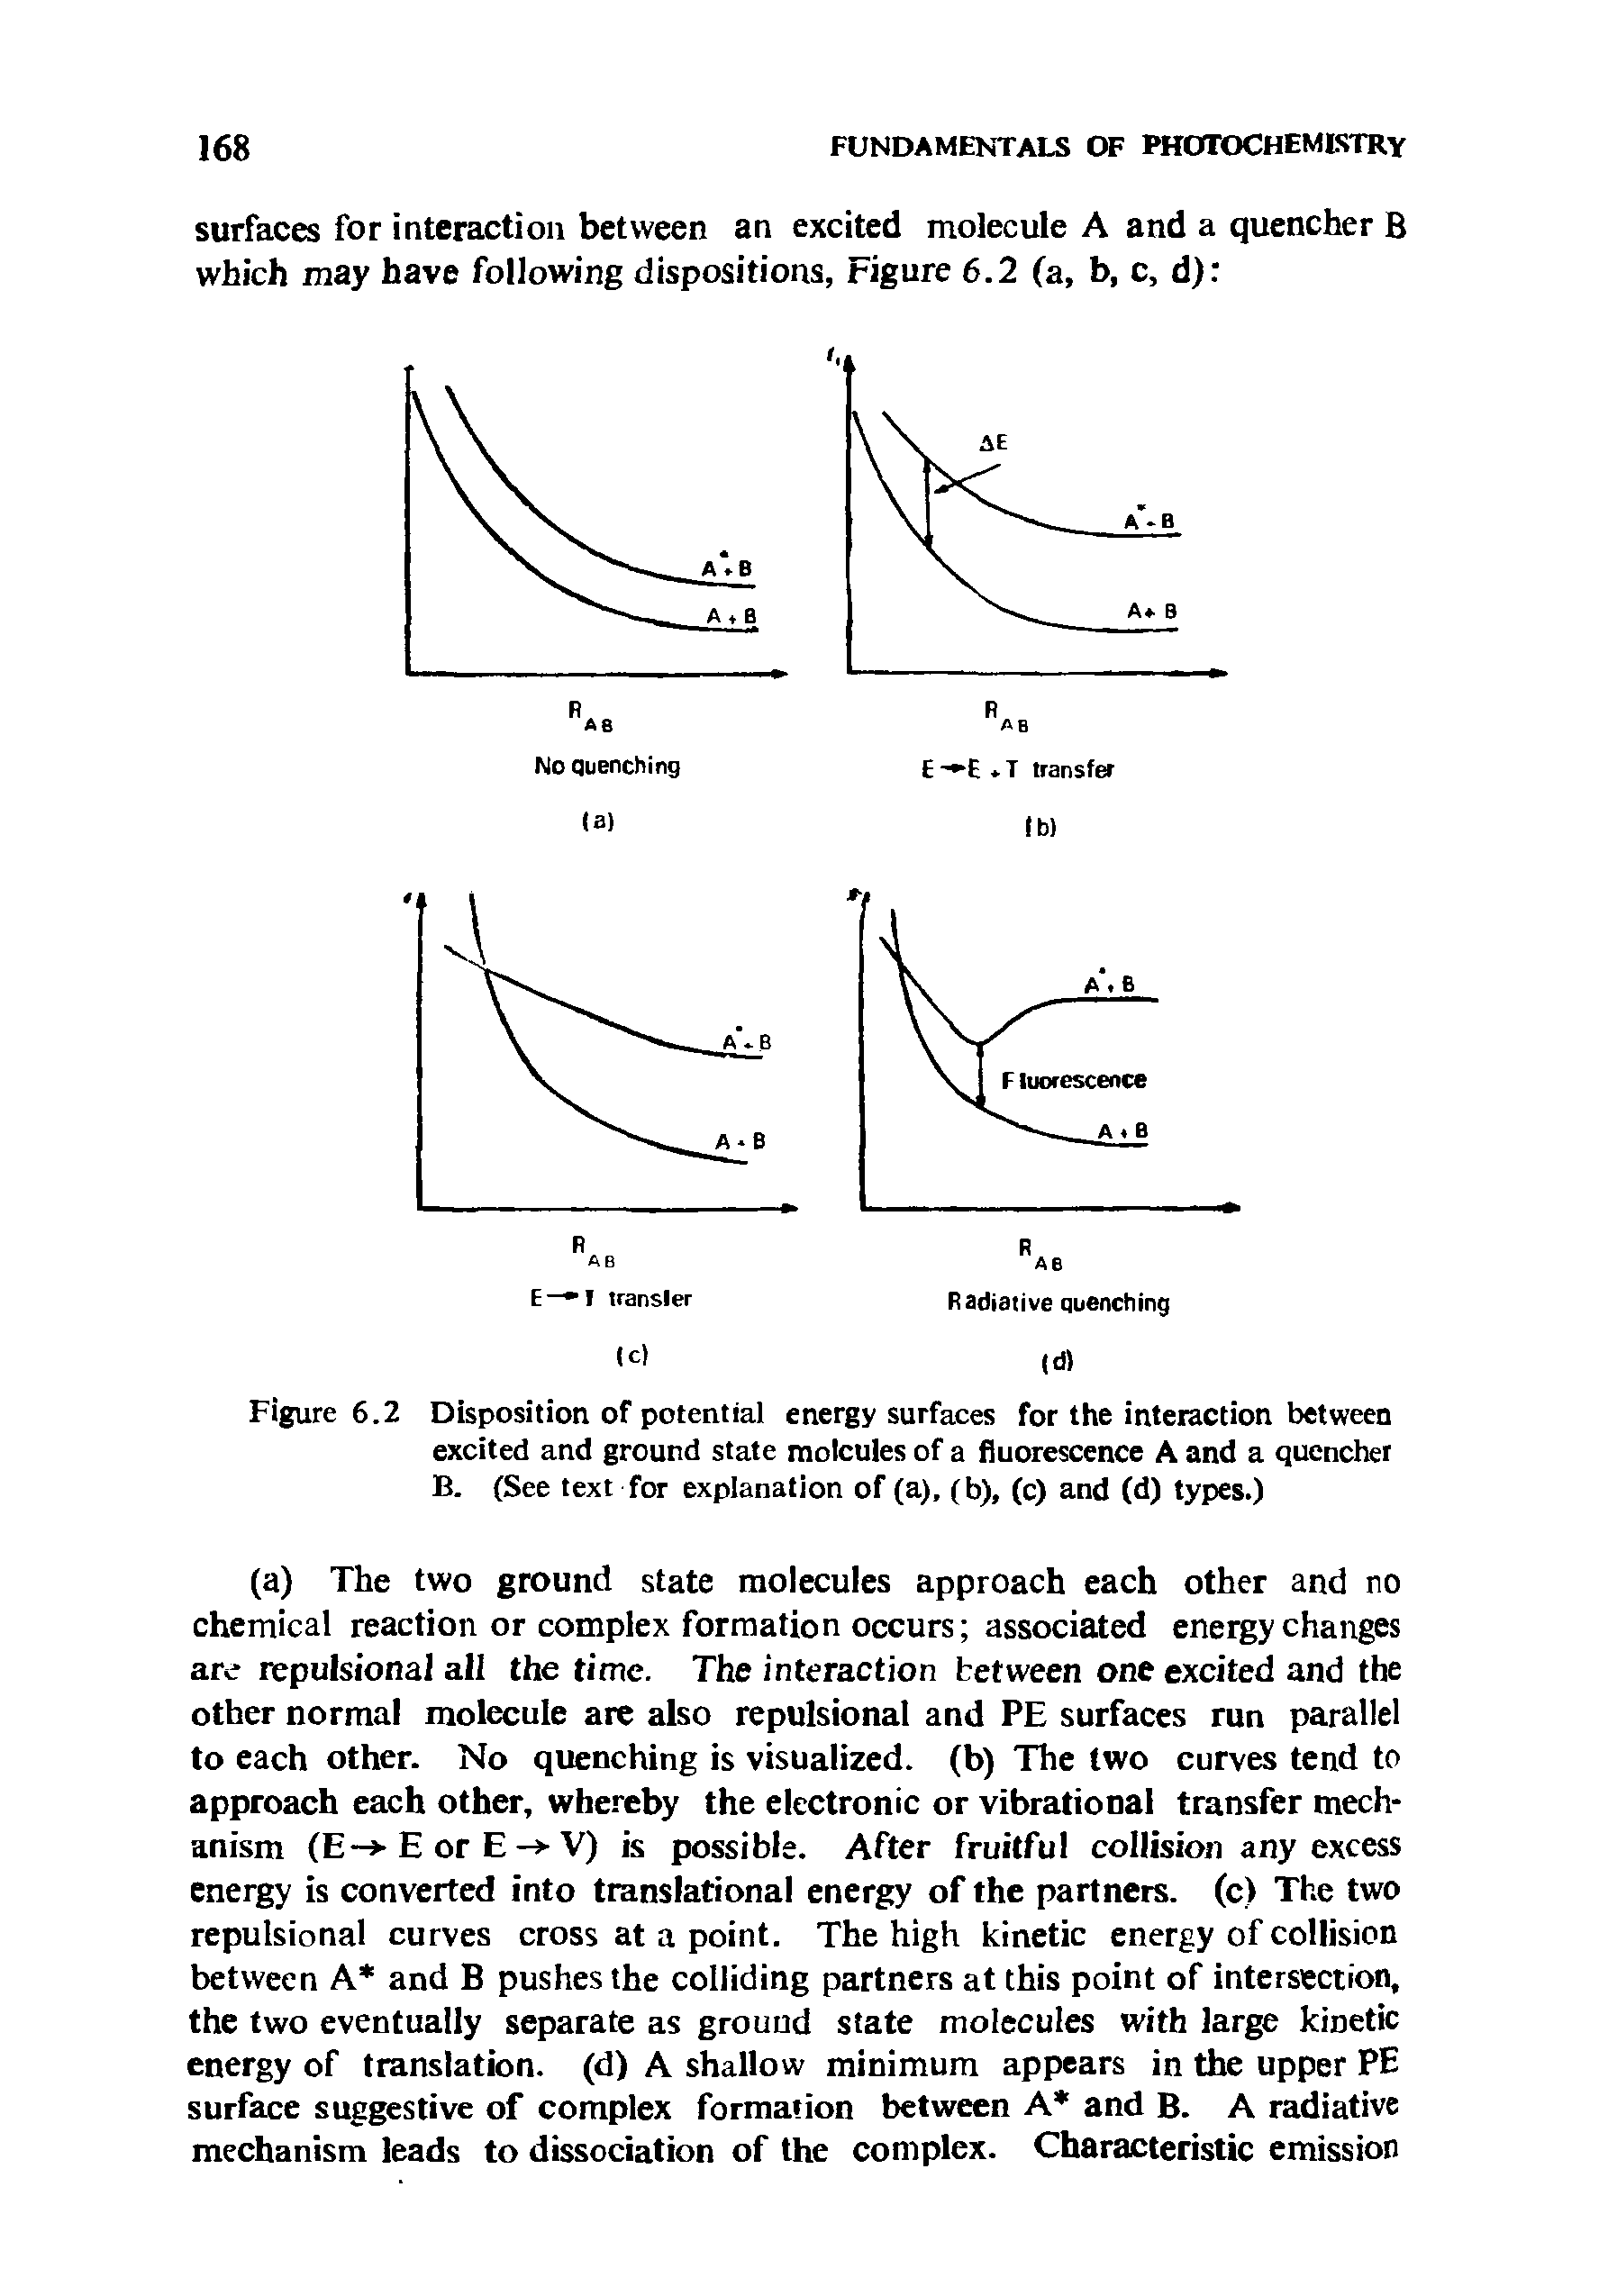 Figure 6.2 Disposition of potential energy surfaces for the interaction between excited and ground state molcules of a fluorescence A and a quencher B. (See text for explanation of (a), (b), (c) and (d) types.)...